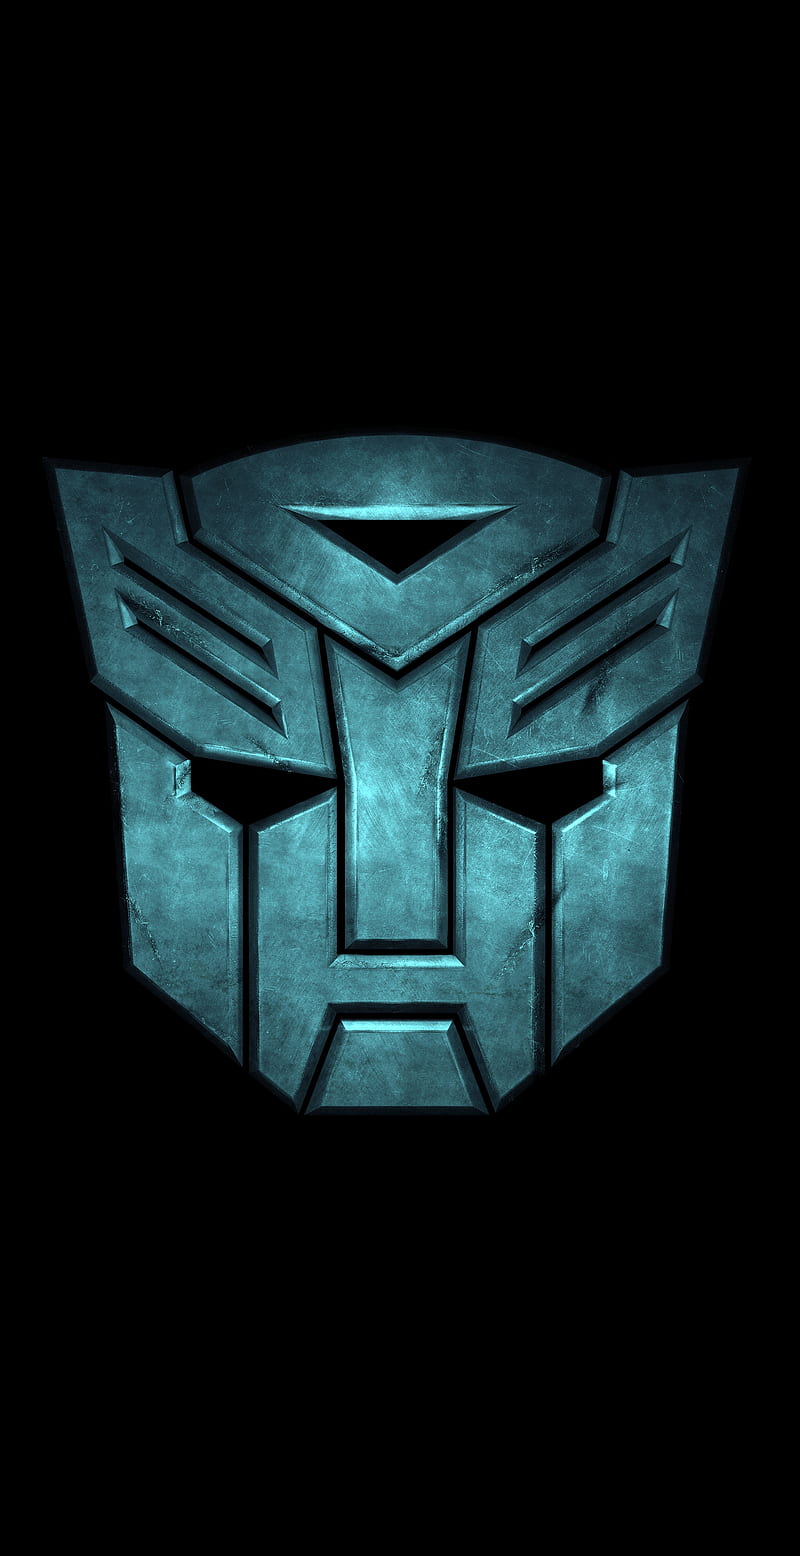 Transformers: The Bumblebee Movie Logo Revealed - Transformers News -  TFW2005